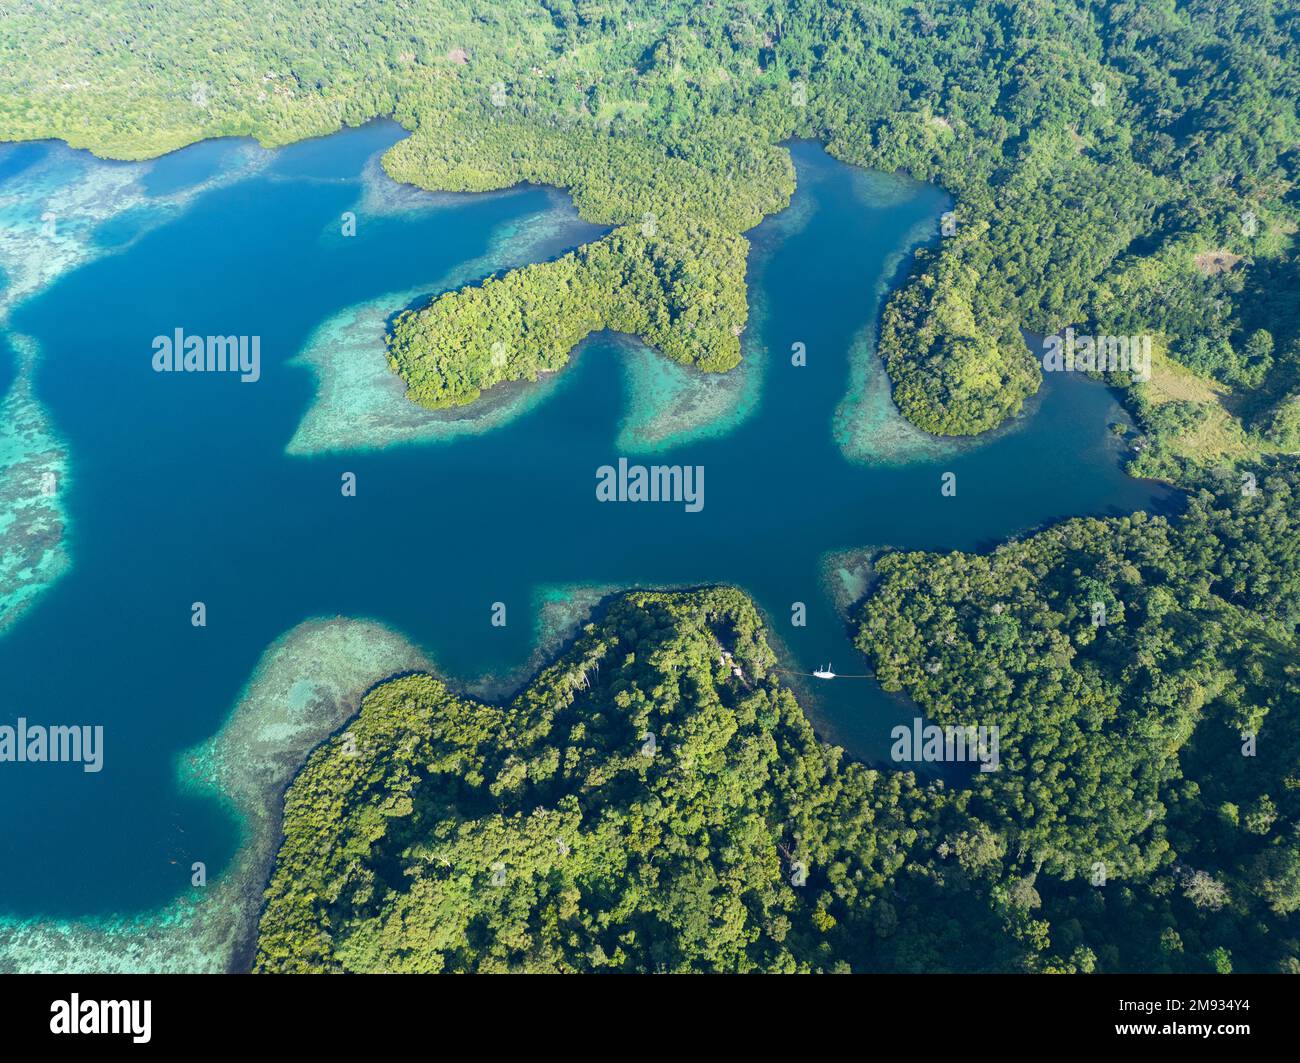 Coral reefs fringe convoluted, tropical islands found in a remote part of the Solomon Islands. This country harbors extraordinary marine biodiversity. Stock Photo